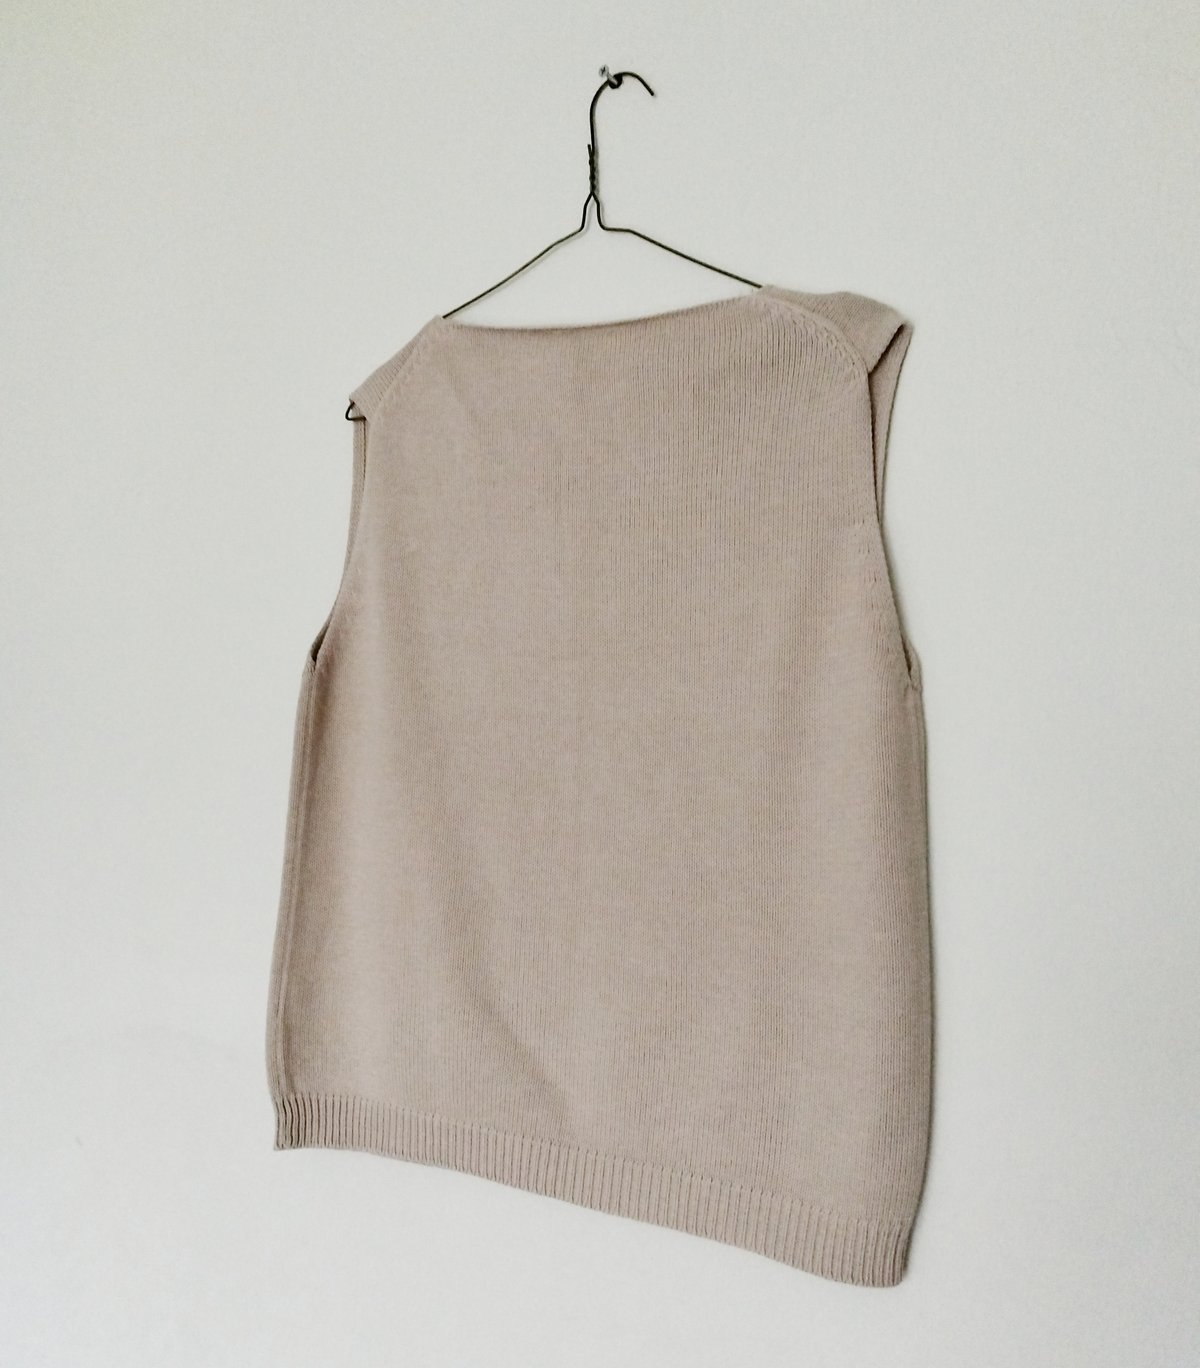 Image of knit top